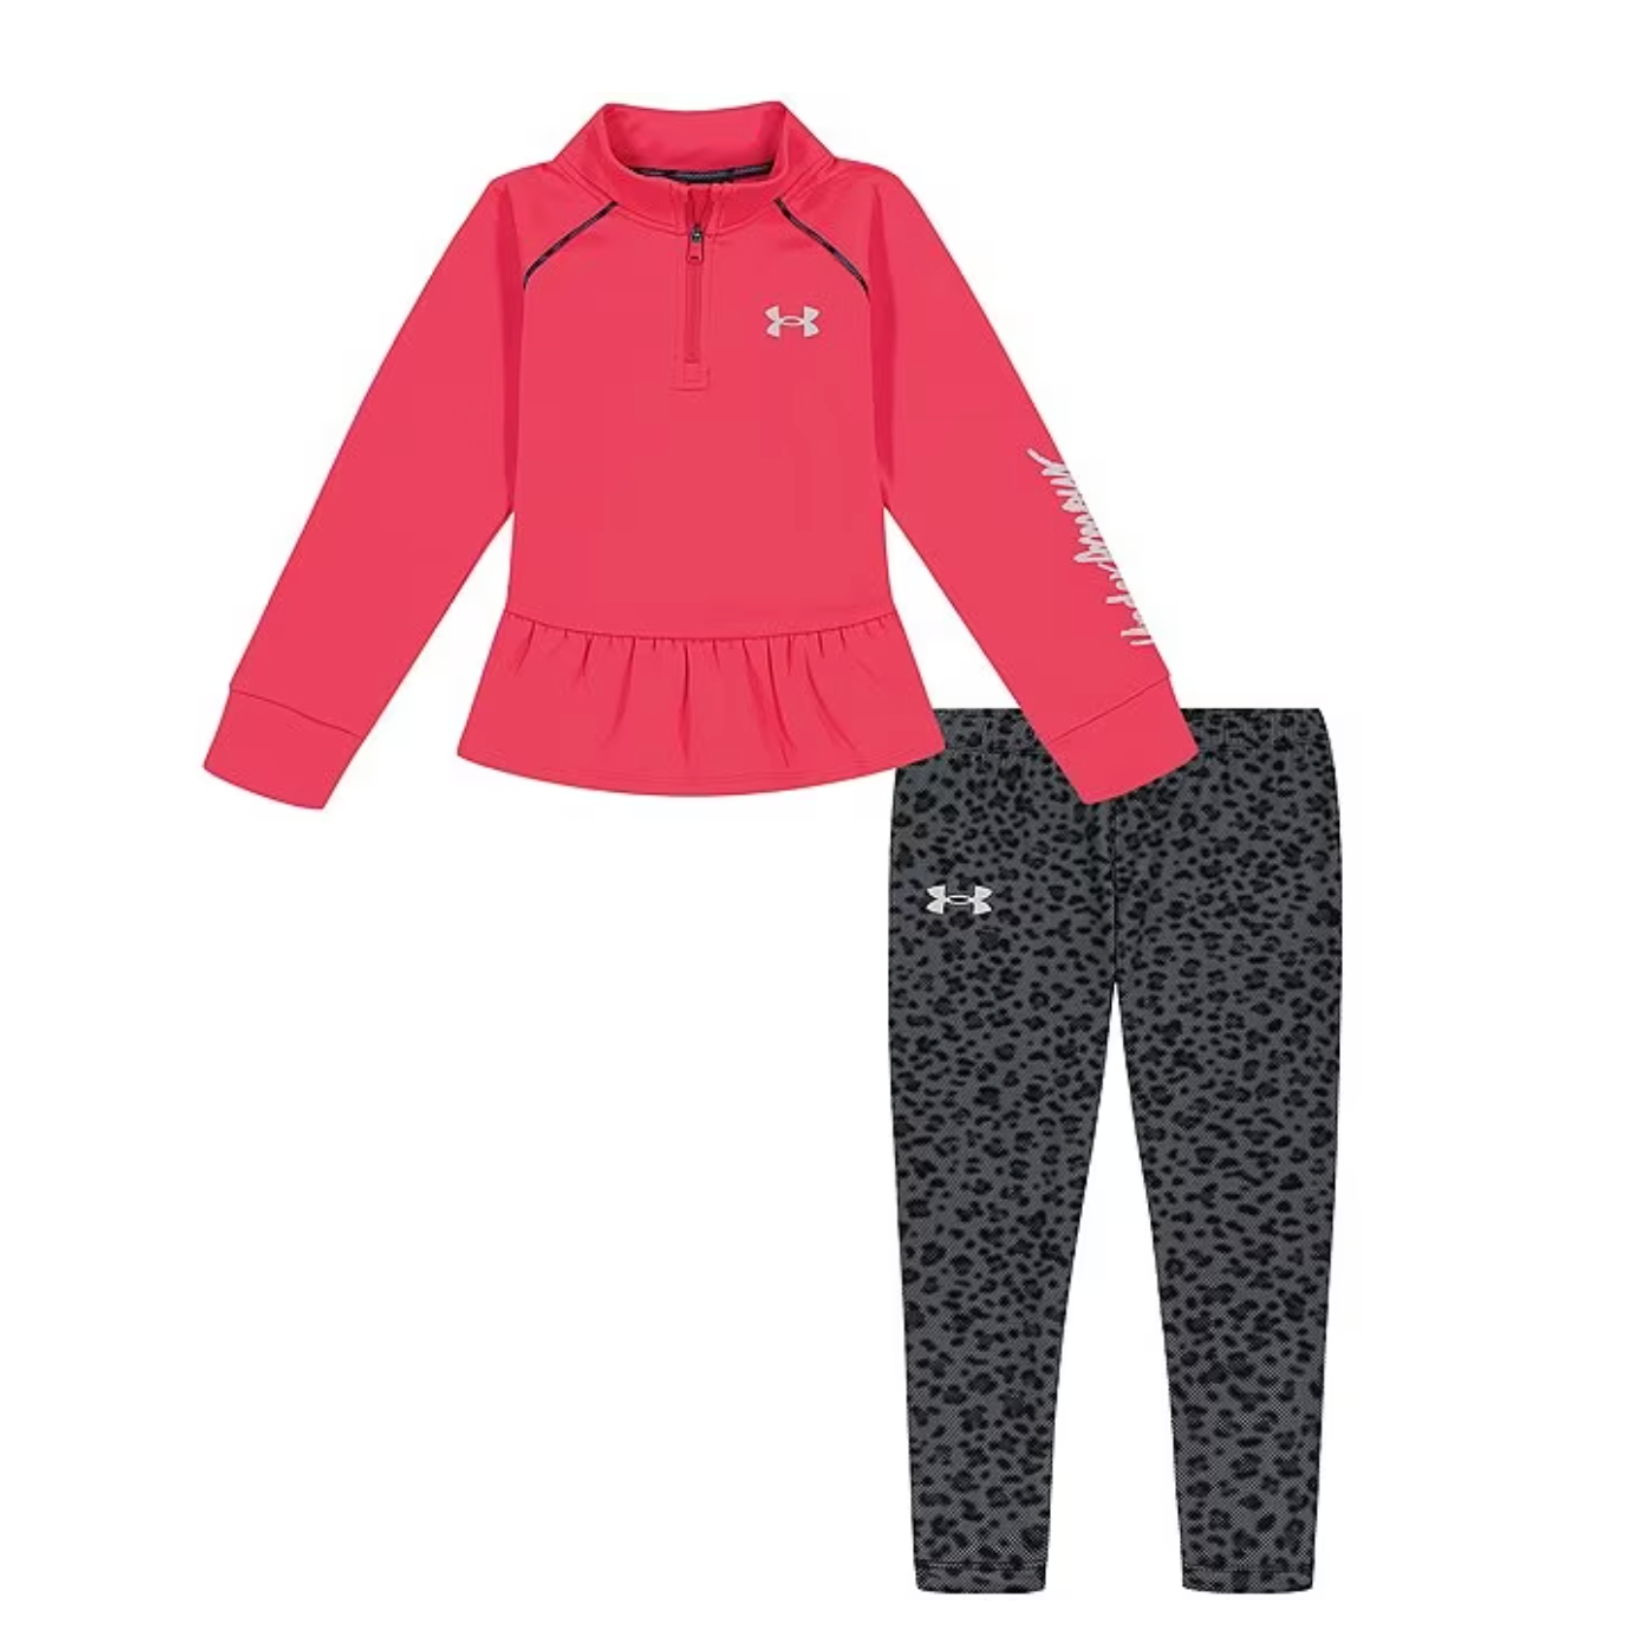 Under Armour Baby Girls' UA Spotted Halftone 1/4 Zip Set - Pink Shock-UNDER ARMOUR-Little Giant Kidz